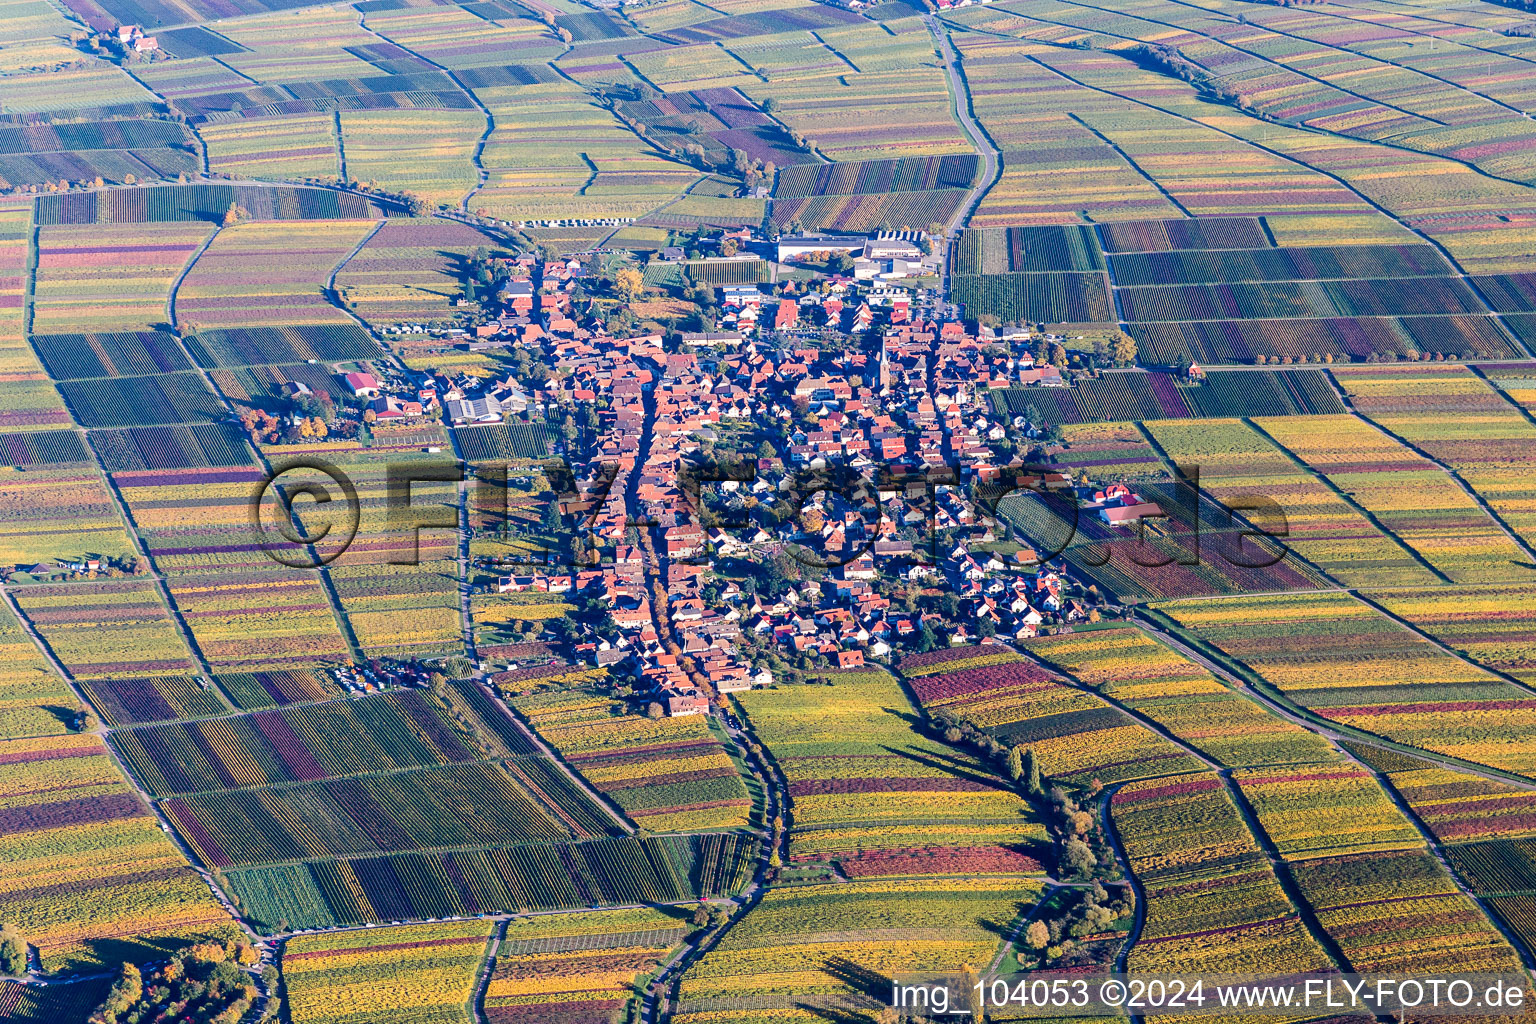 Aerial view of Vineyards in autumn colors in Rhodt unter Rietburg in the state Rhineland-Palatinate, Germany